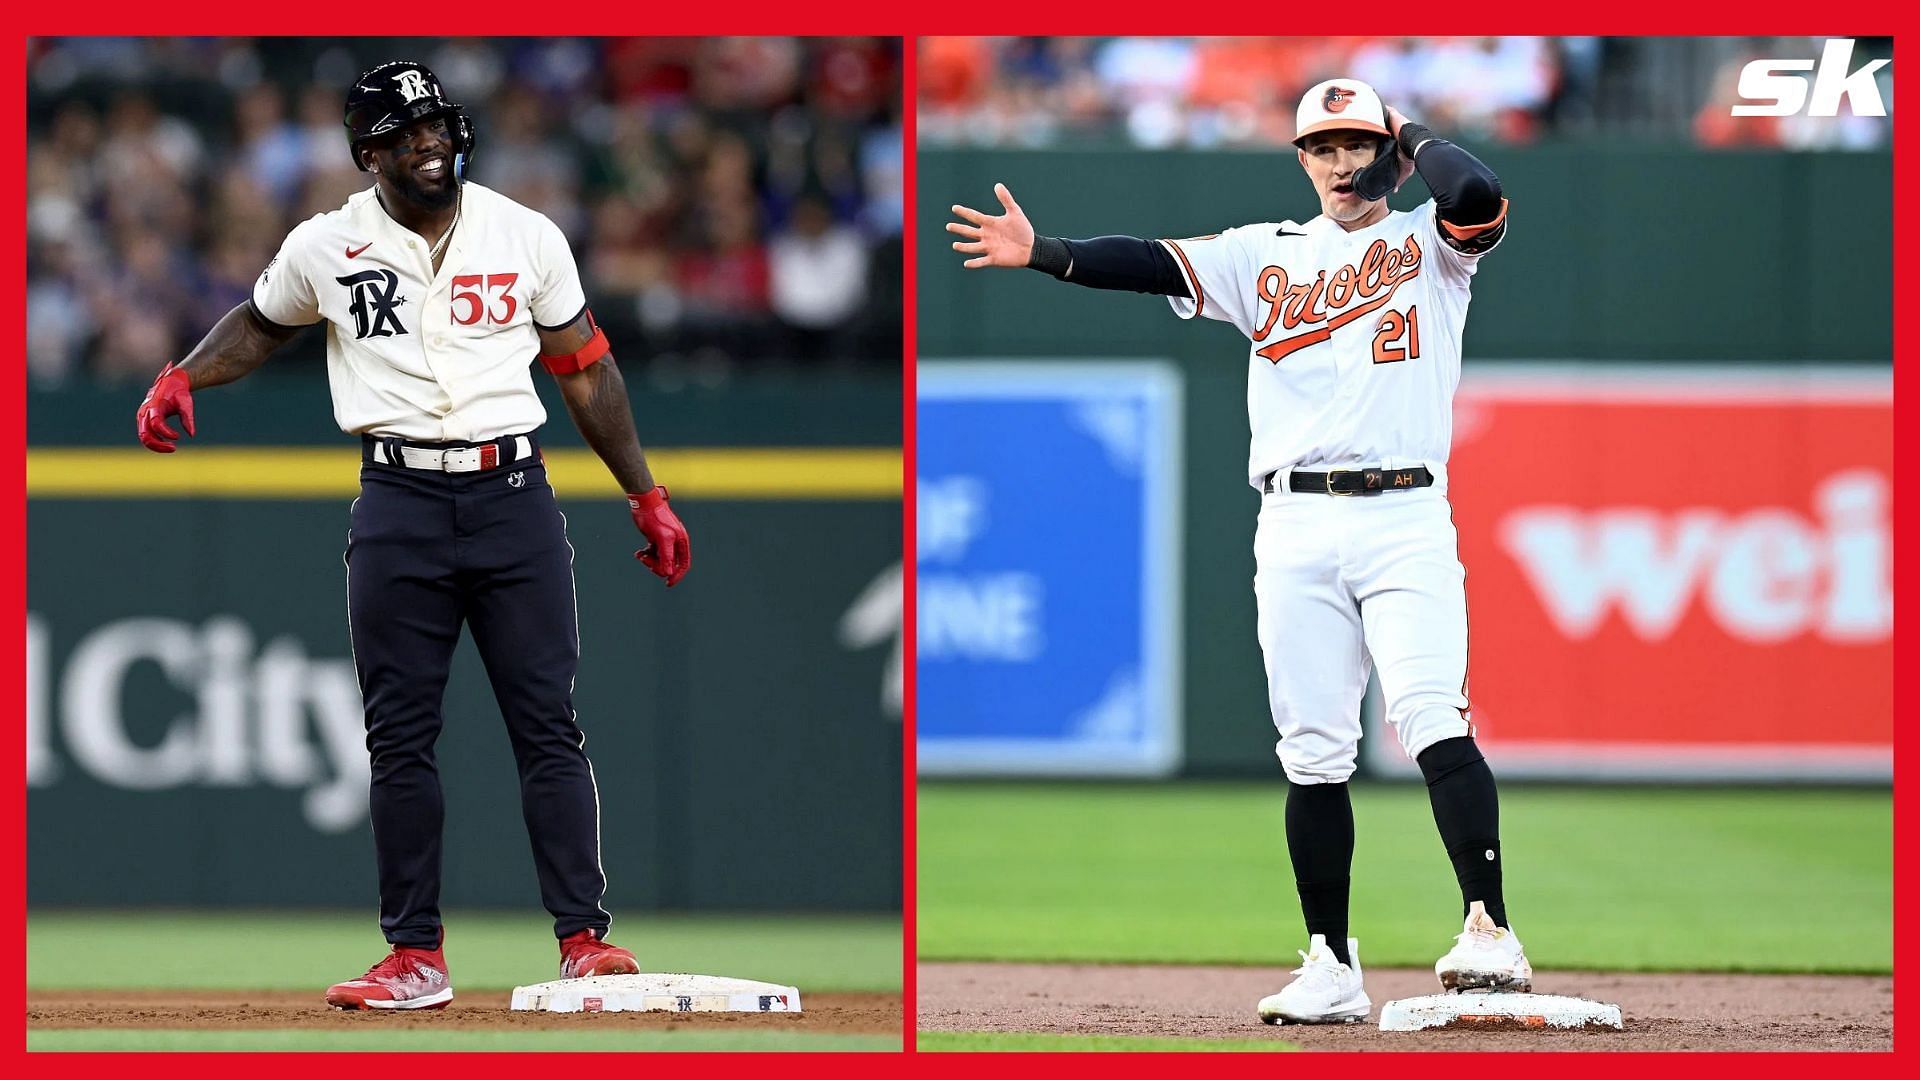 4 Baltimore Orioles players selected as American League All-Stars